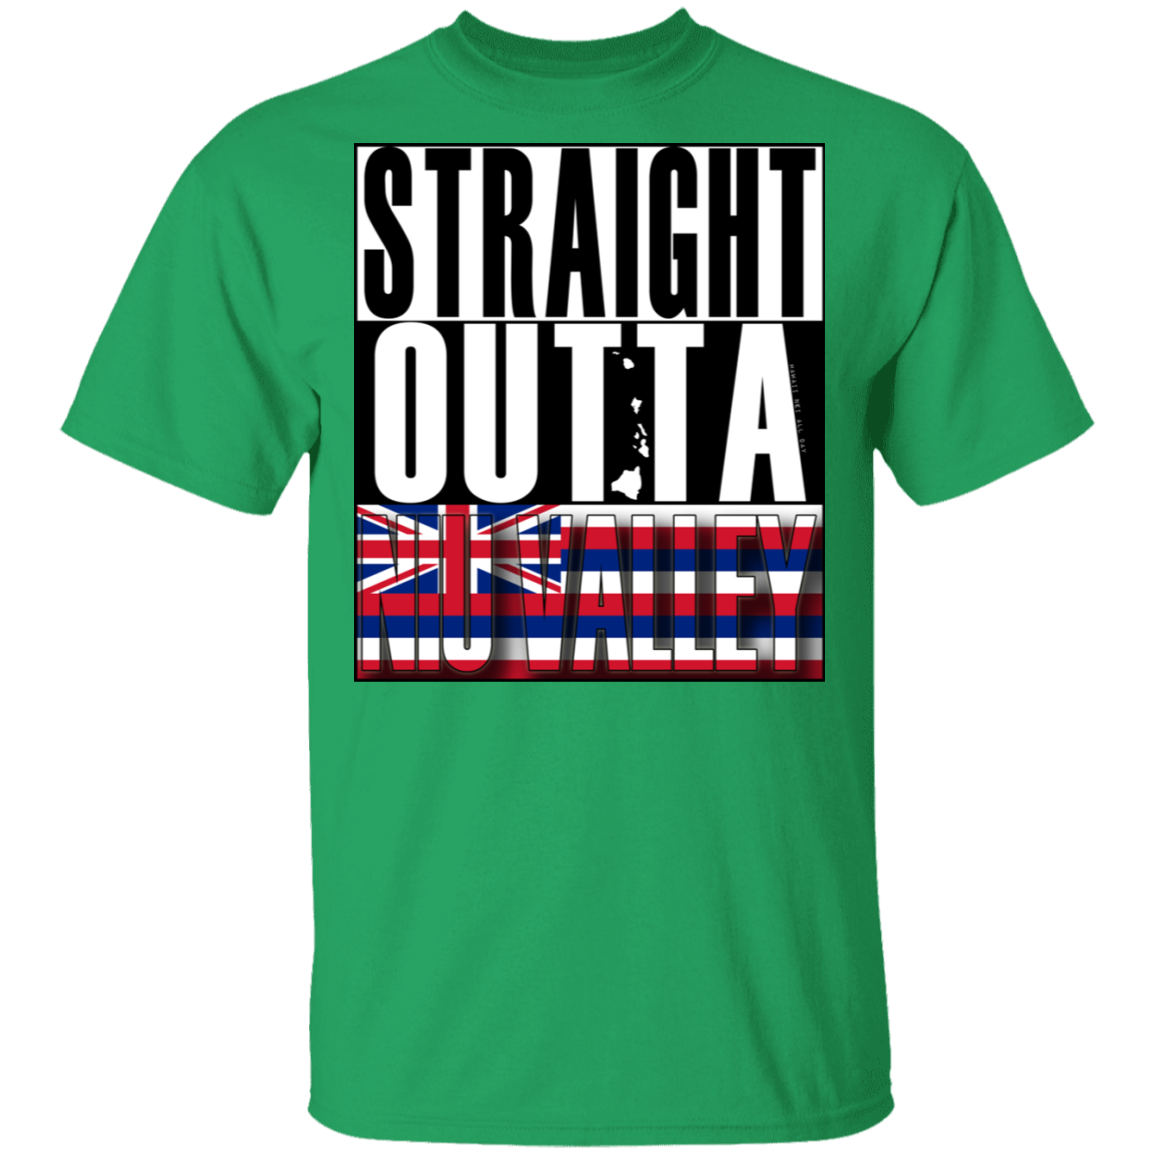 Straight Outta Niu Valley T-Shirt, T-Shirts, Hawaii Nei All Day